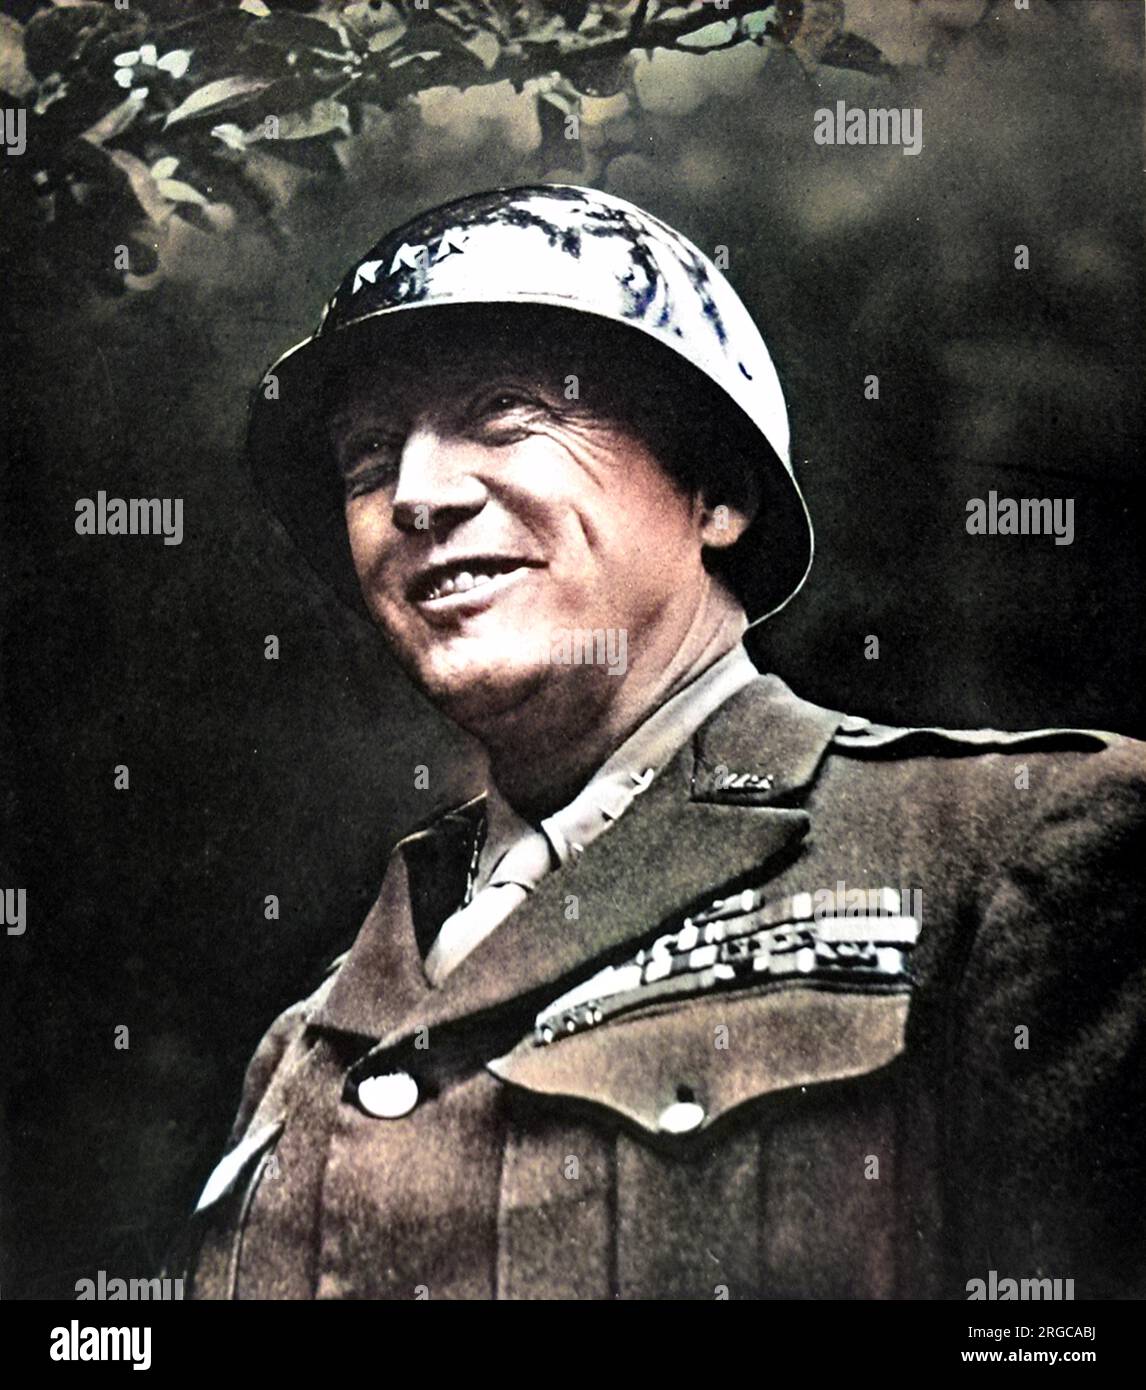 Lieutenant-General George S. Patton (1885 - 1945), the American military commander, pictured in early 1945. Stock Photo